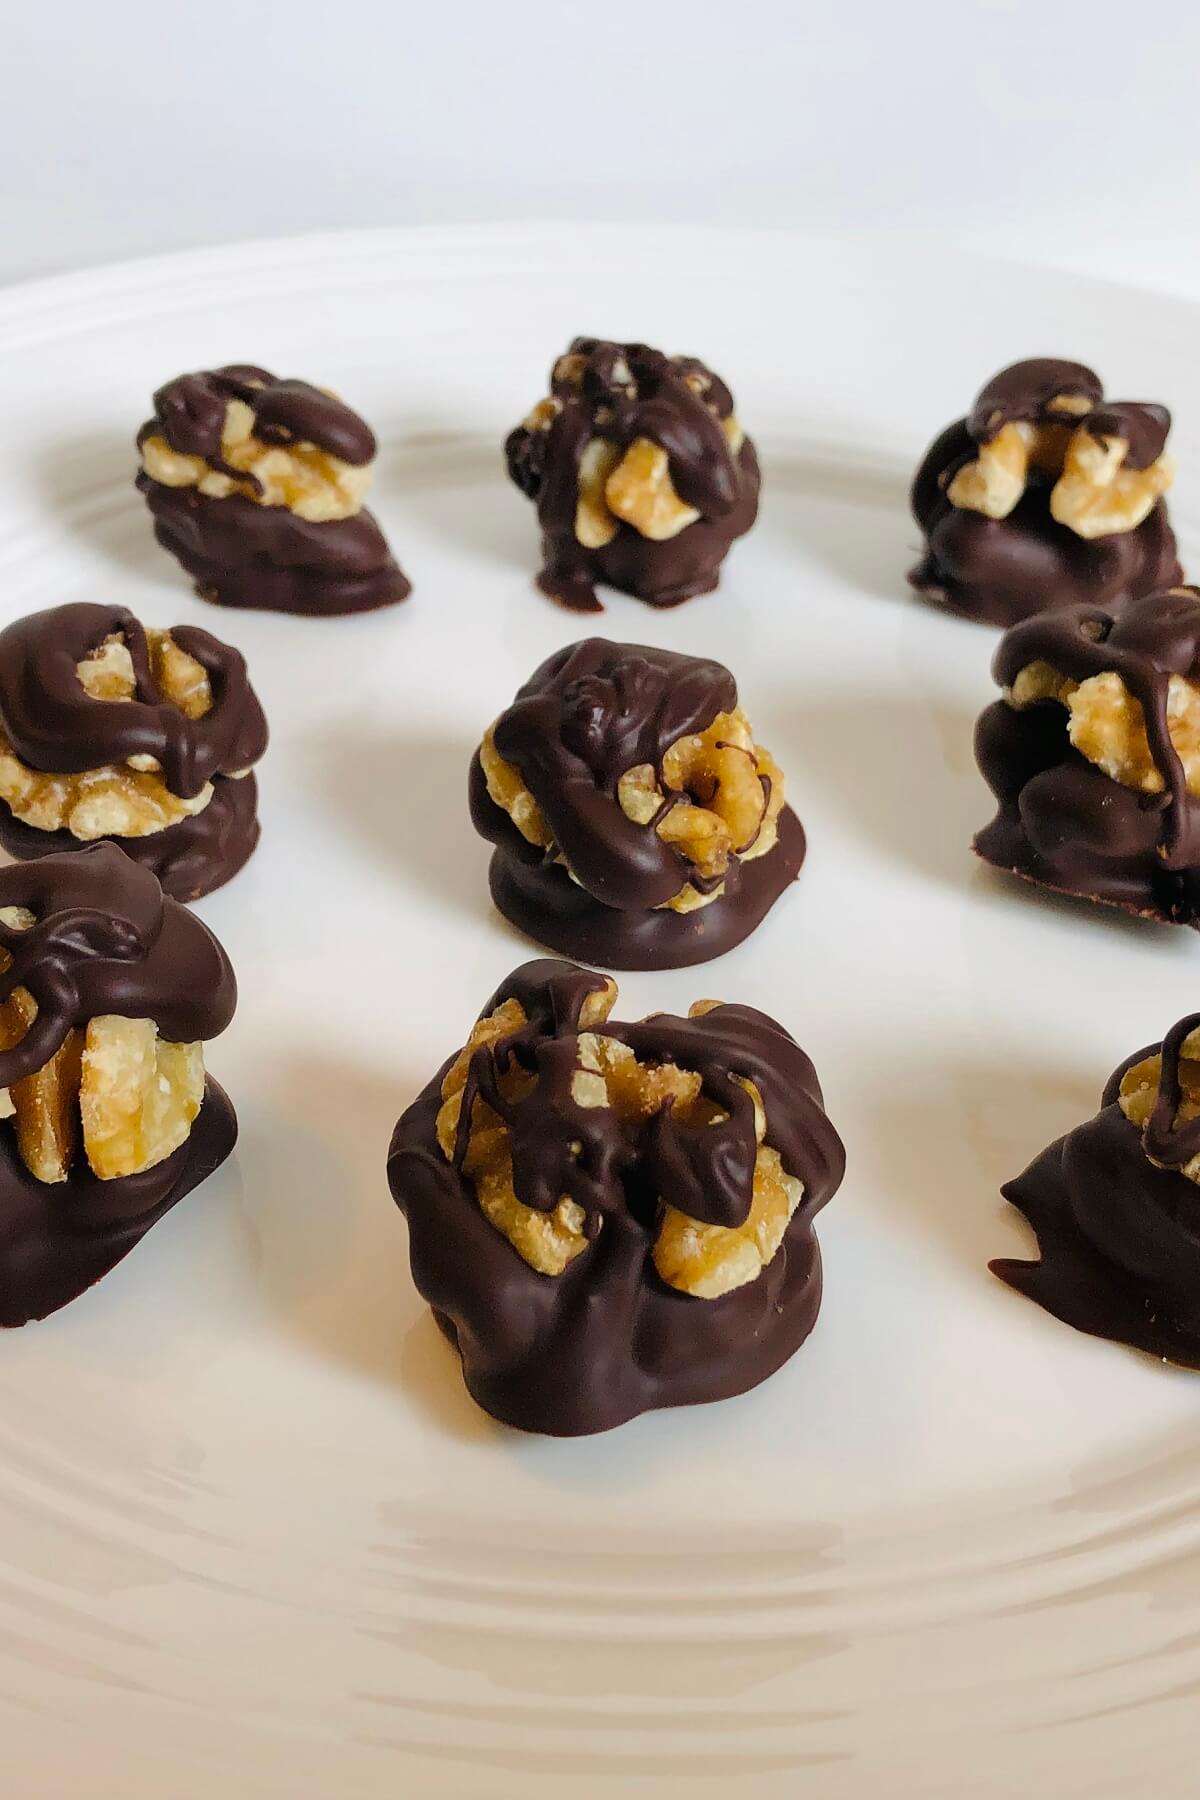 Chocolate covered walnuts displayed on a plate.